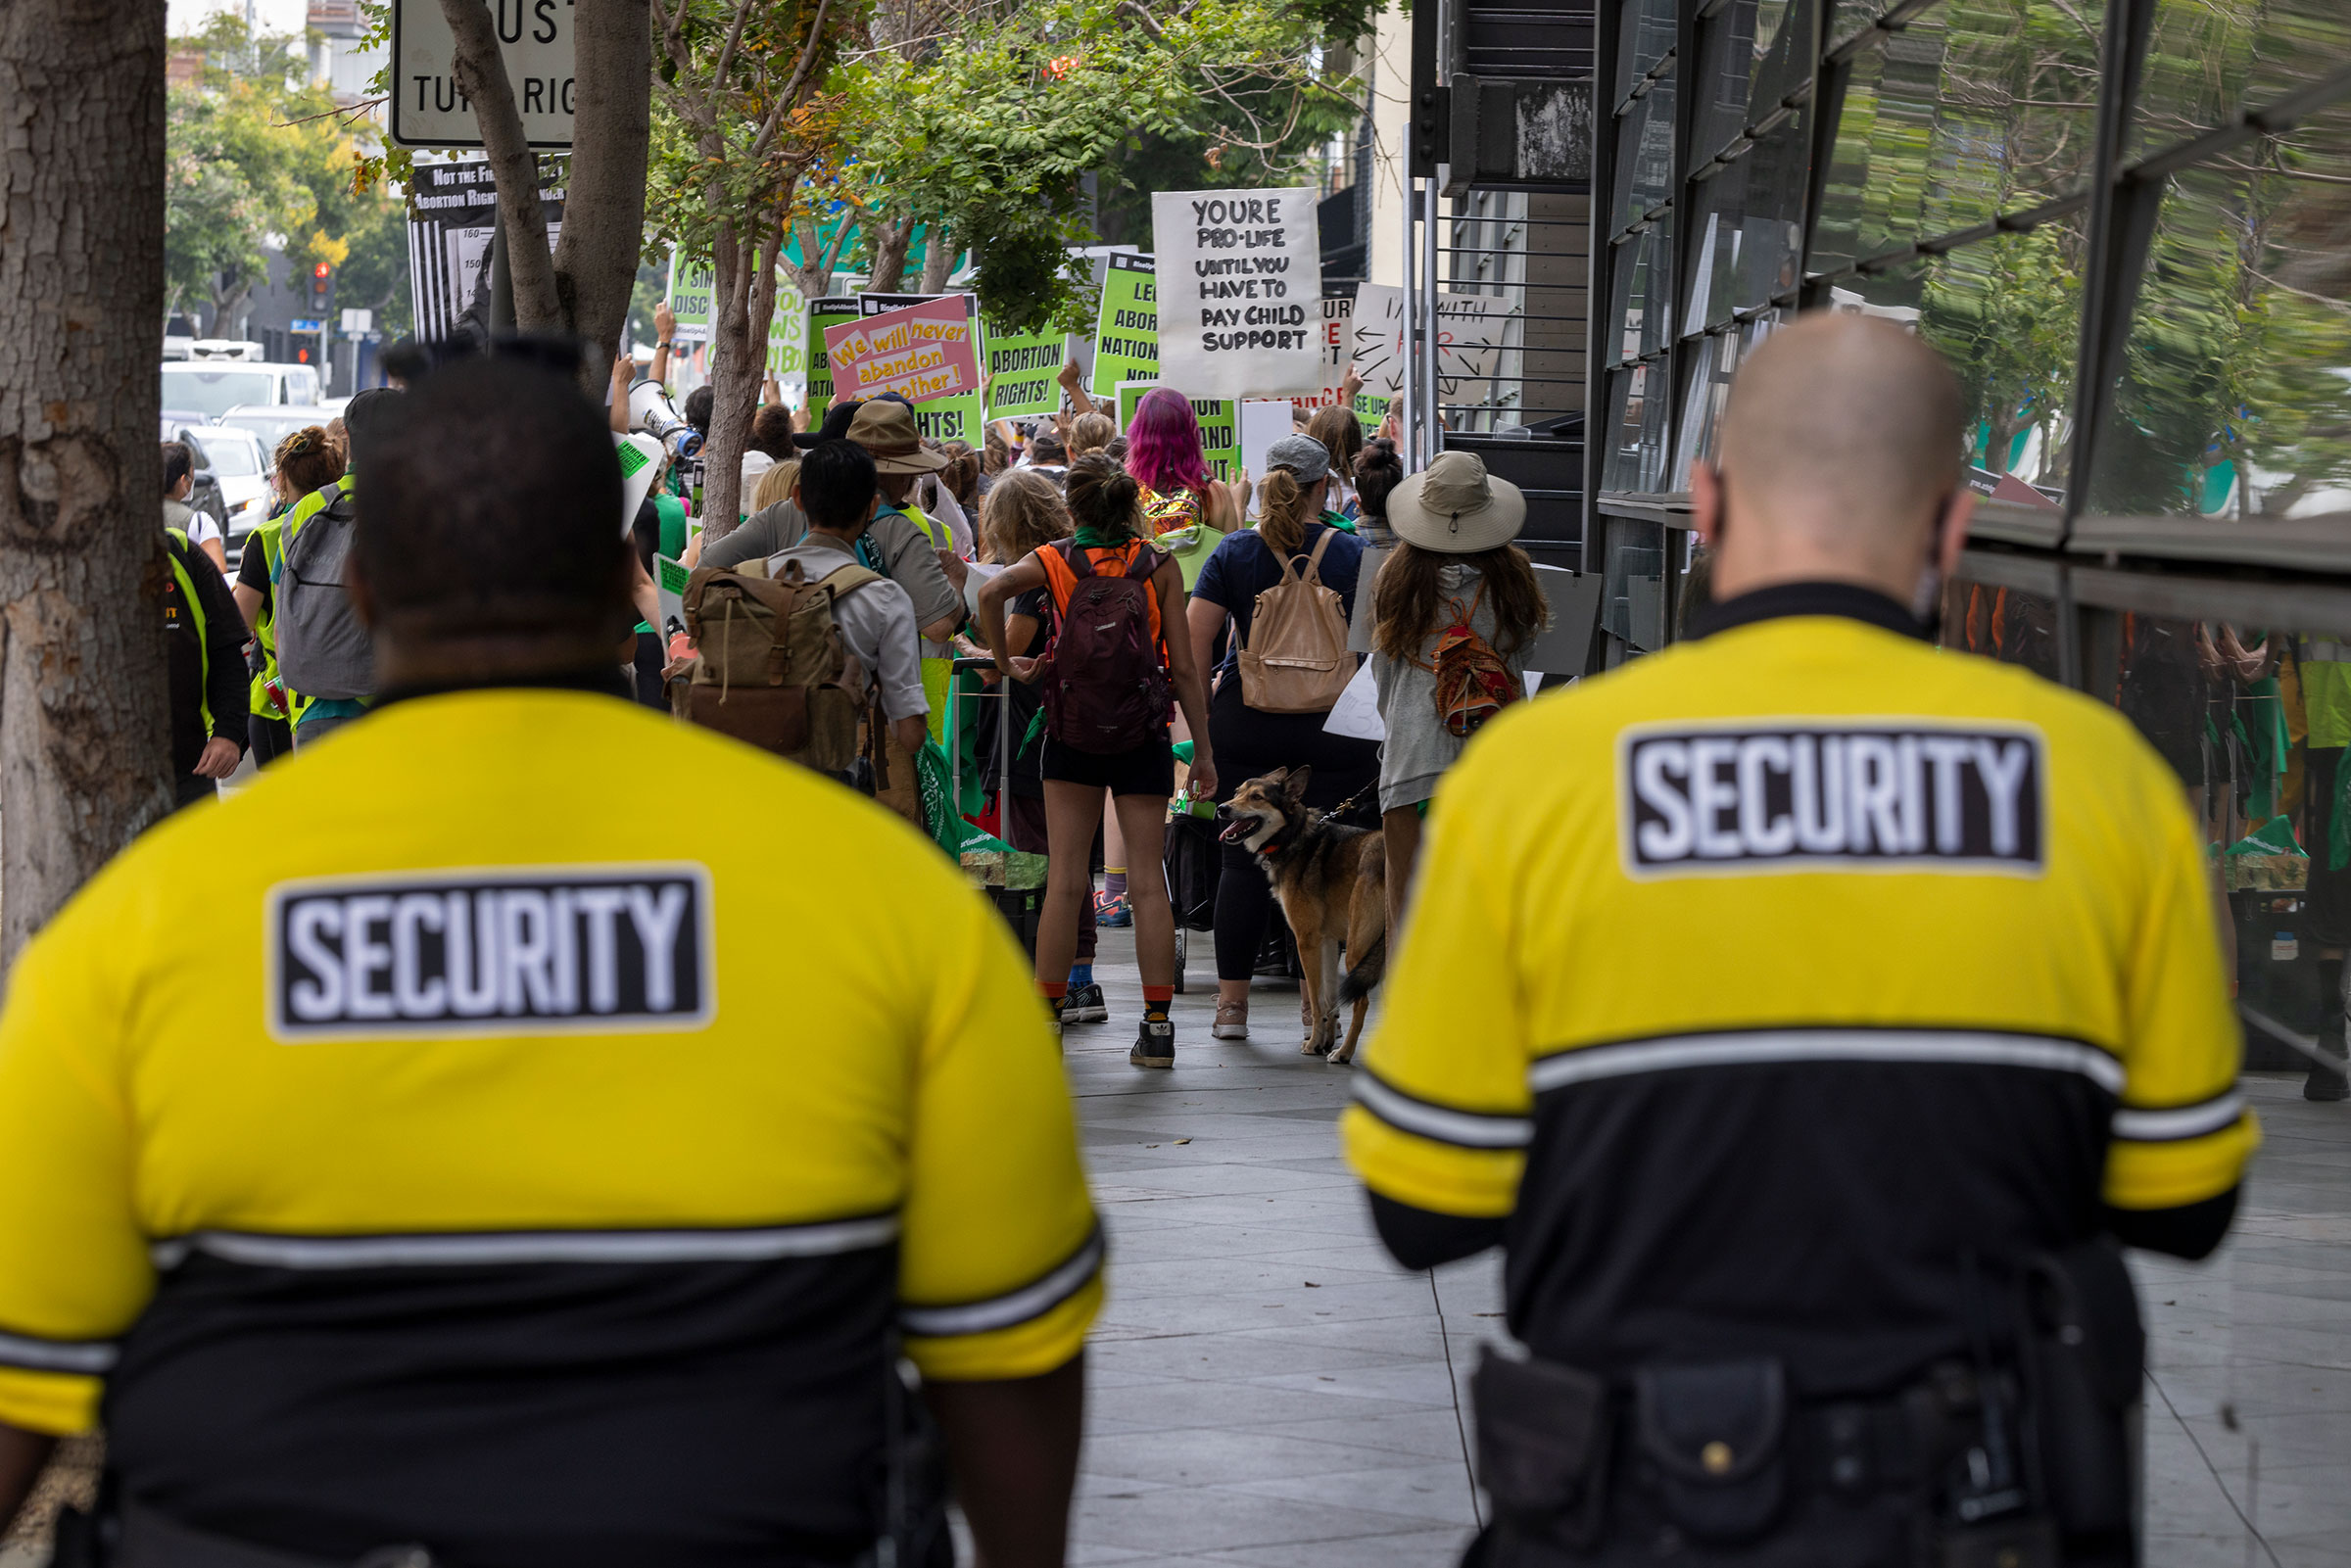 Private security guards follow behind protesters marching to a Planned Parenthood office, which was targeted by Proud Boys and an anti-abortion group the previous week, to denounce the US Supreme Court decision to end abortion rights protections in Santa Monica, Calif. on July 16, 2022.